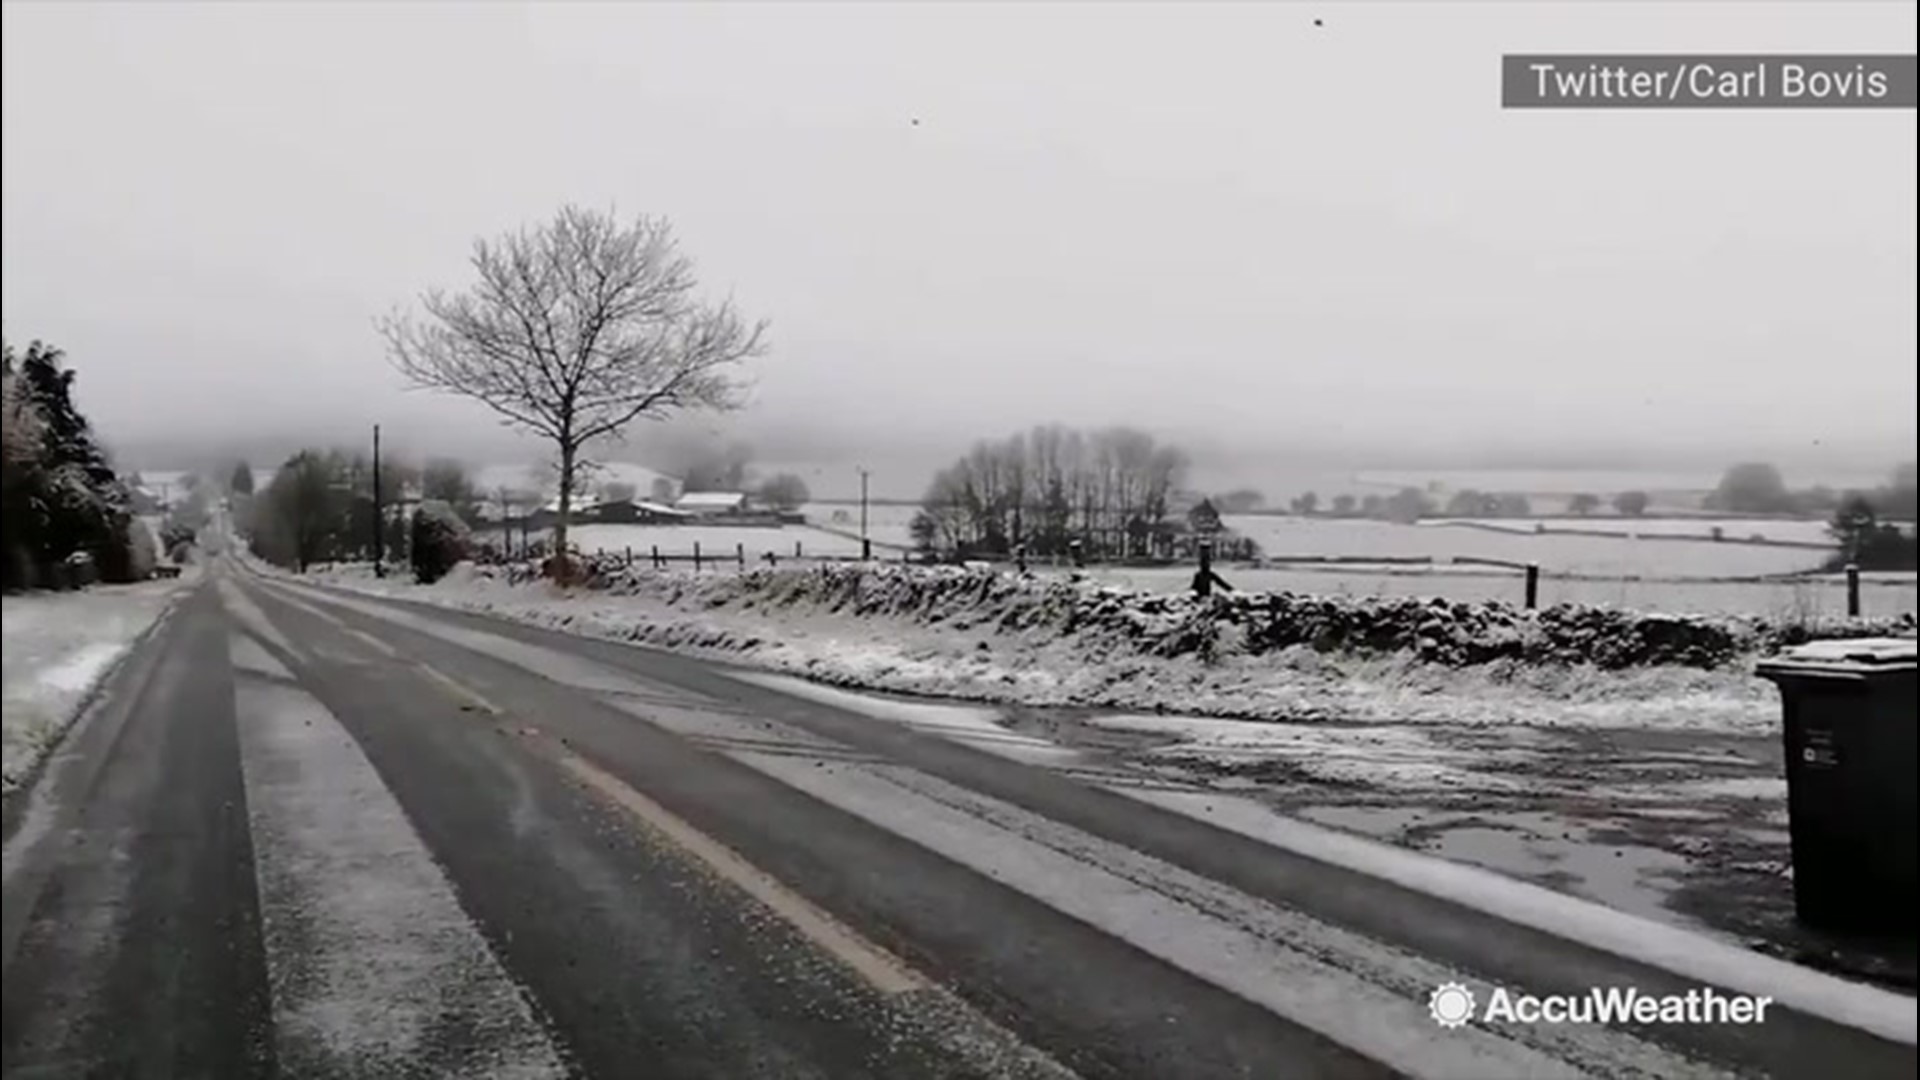 Somerset in the United Kingdom has just received its first snowfall of the season on Nov. 14. This is a look at the countryside from Mendip Hills.